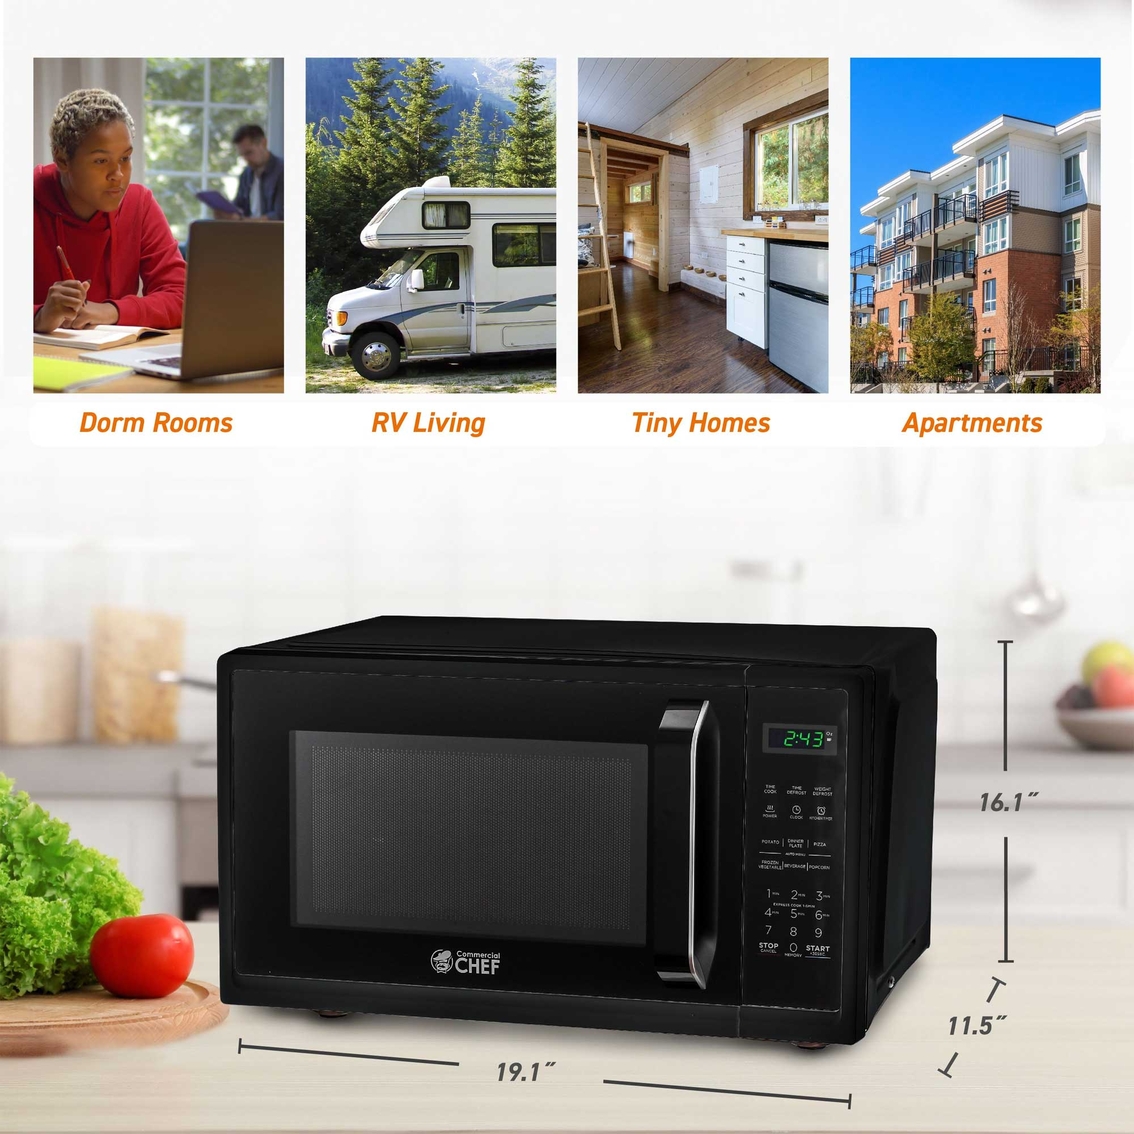 Commercial Chef 0.9 Cu. Ft. Countertop Microwave Oven - Image 7 of 7